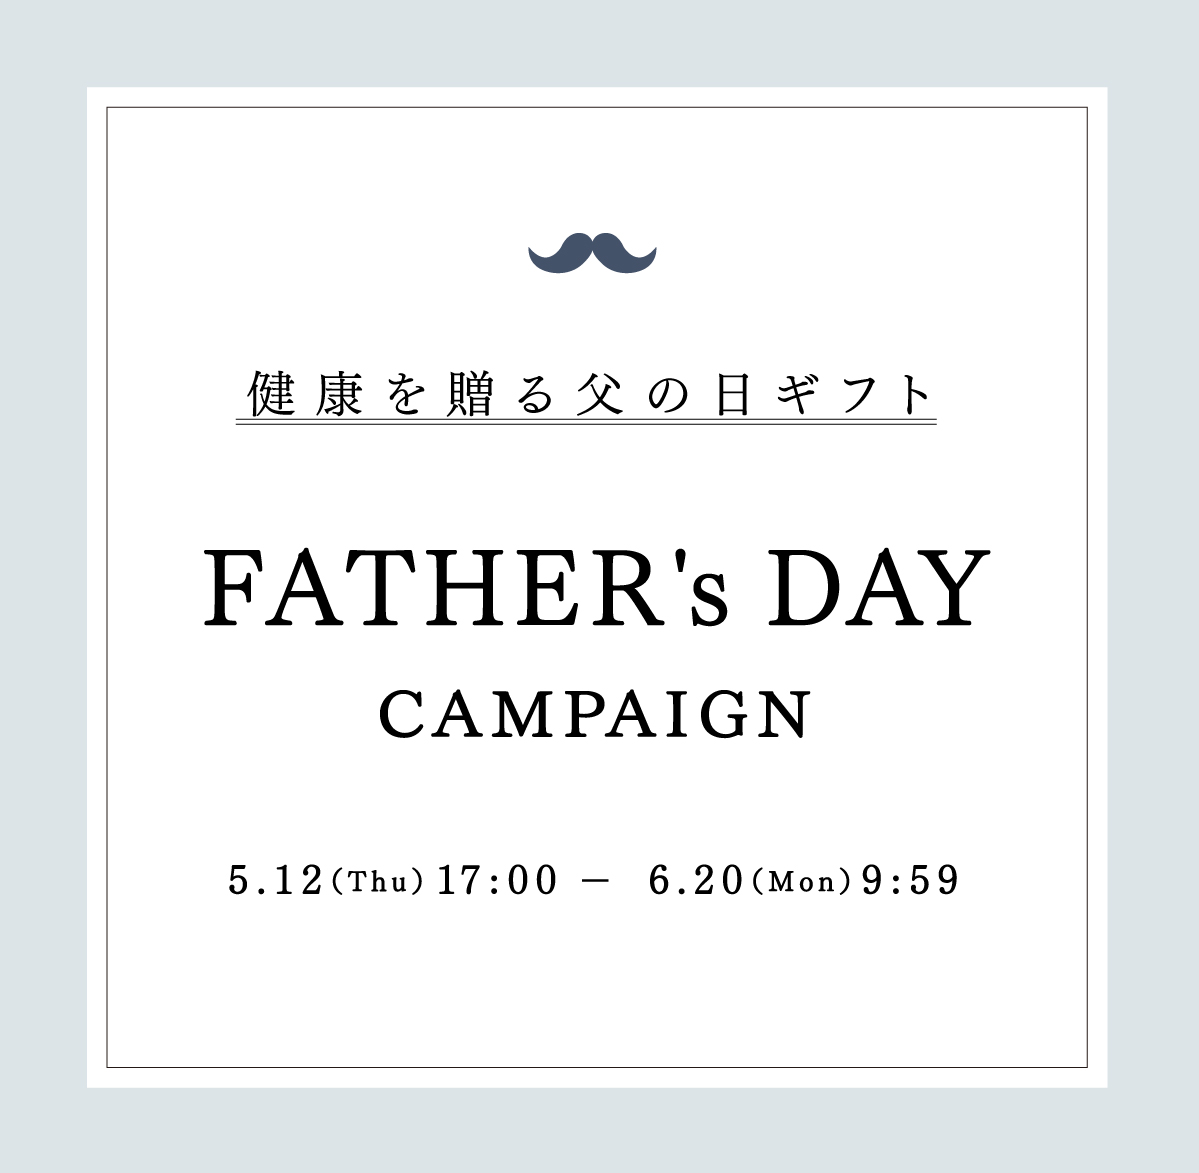 MYTREX Father's Day Campaign 『いつまでも元気でいてね』 MYTREXで気持ち伝える感謝の日